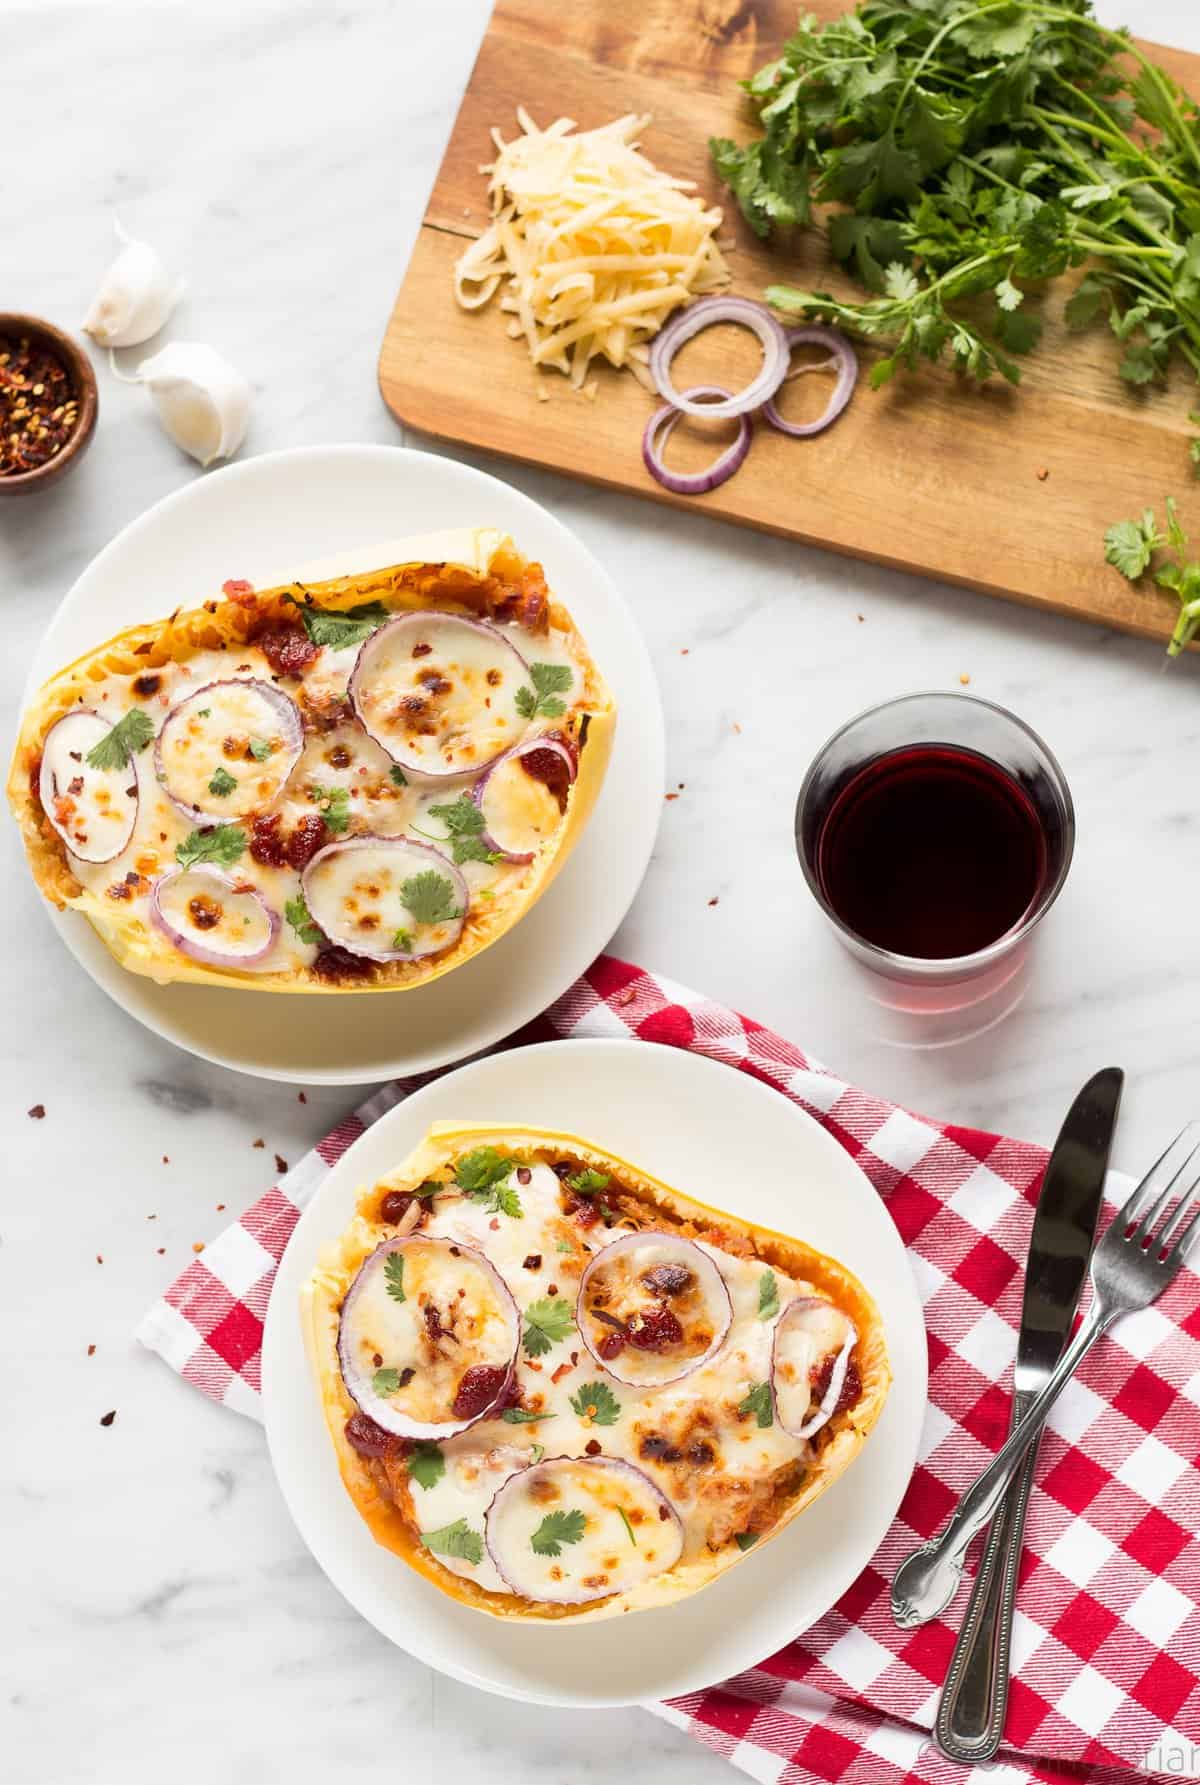 These BBQ Chicken Pizza Spaghetti Squash boats have all the delicious flavors of a BBQ Chicken Pizza - sweet and savory BBQ chicken, red onions and two kinds of cheese, stuffed in a spaghetti squash boat!